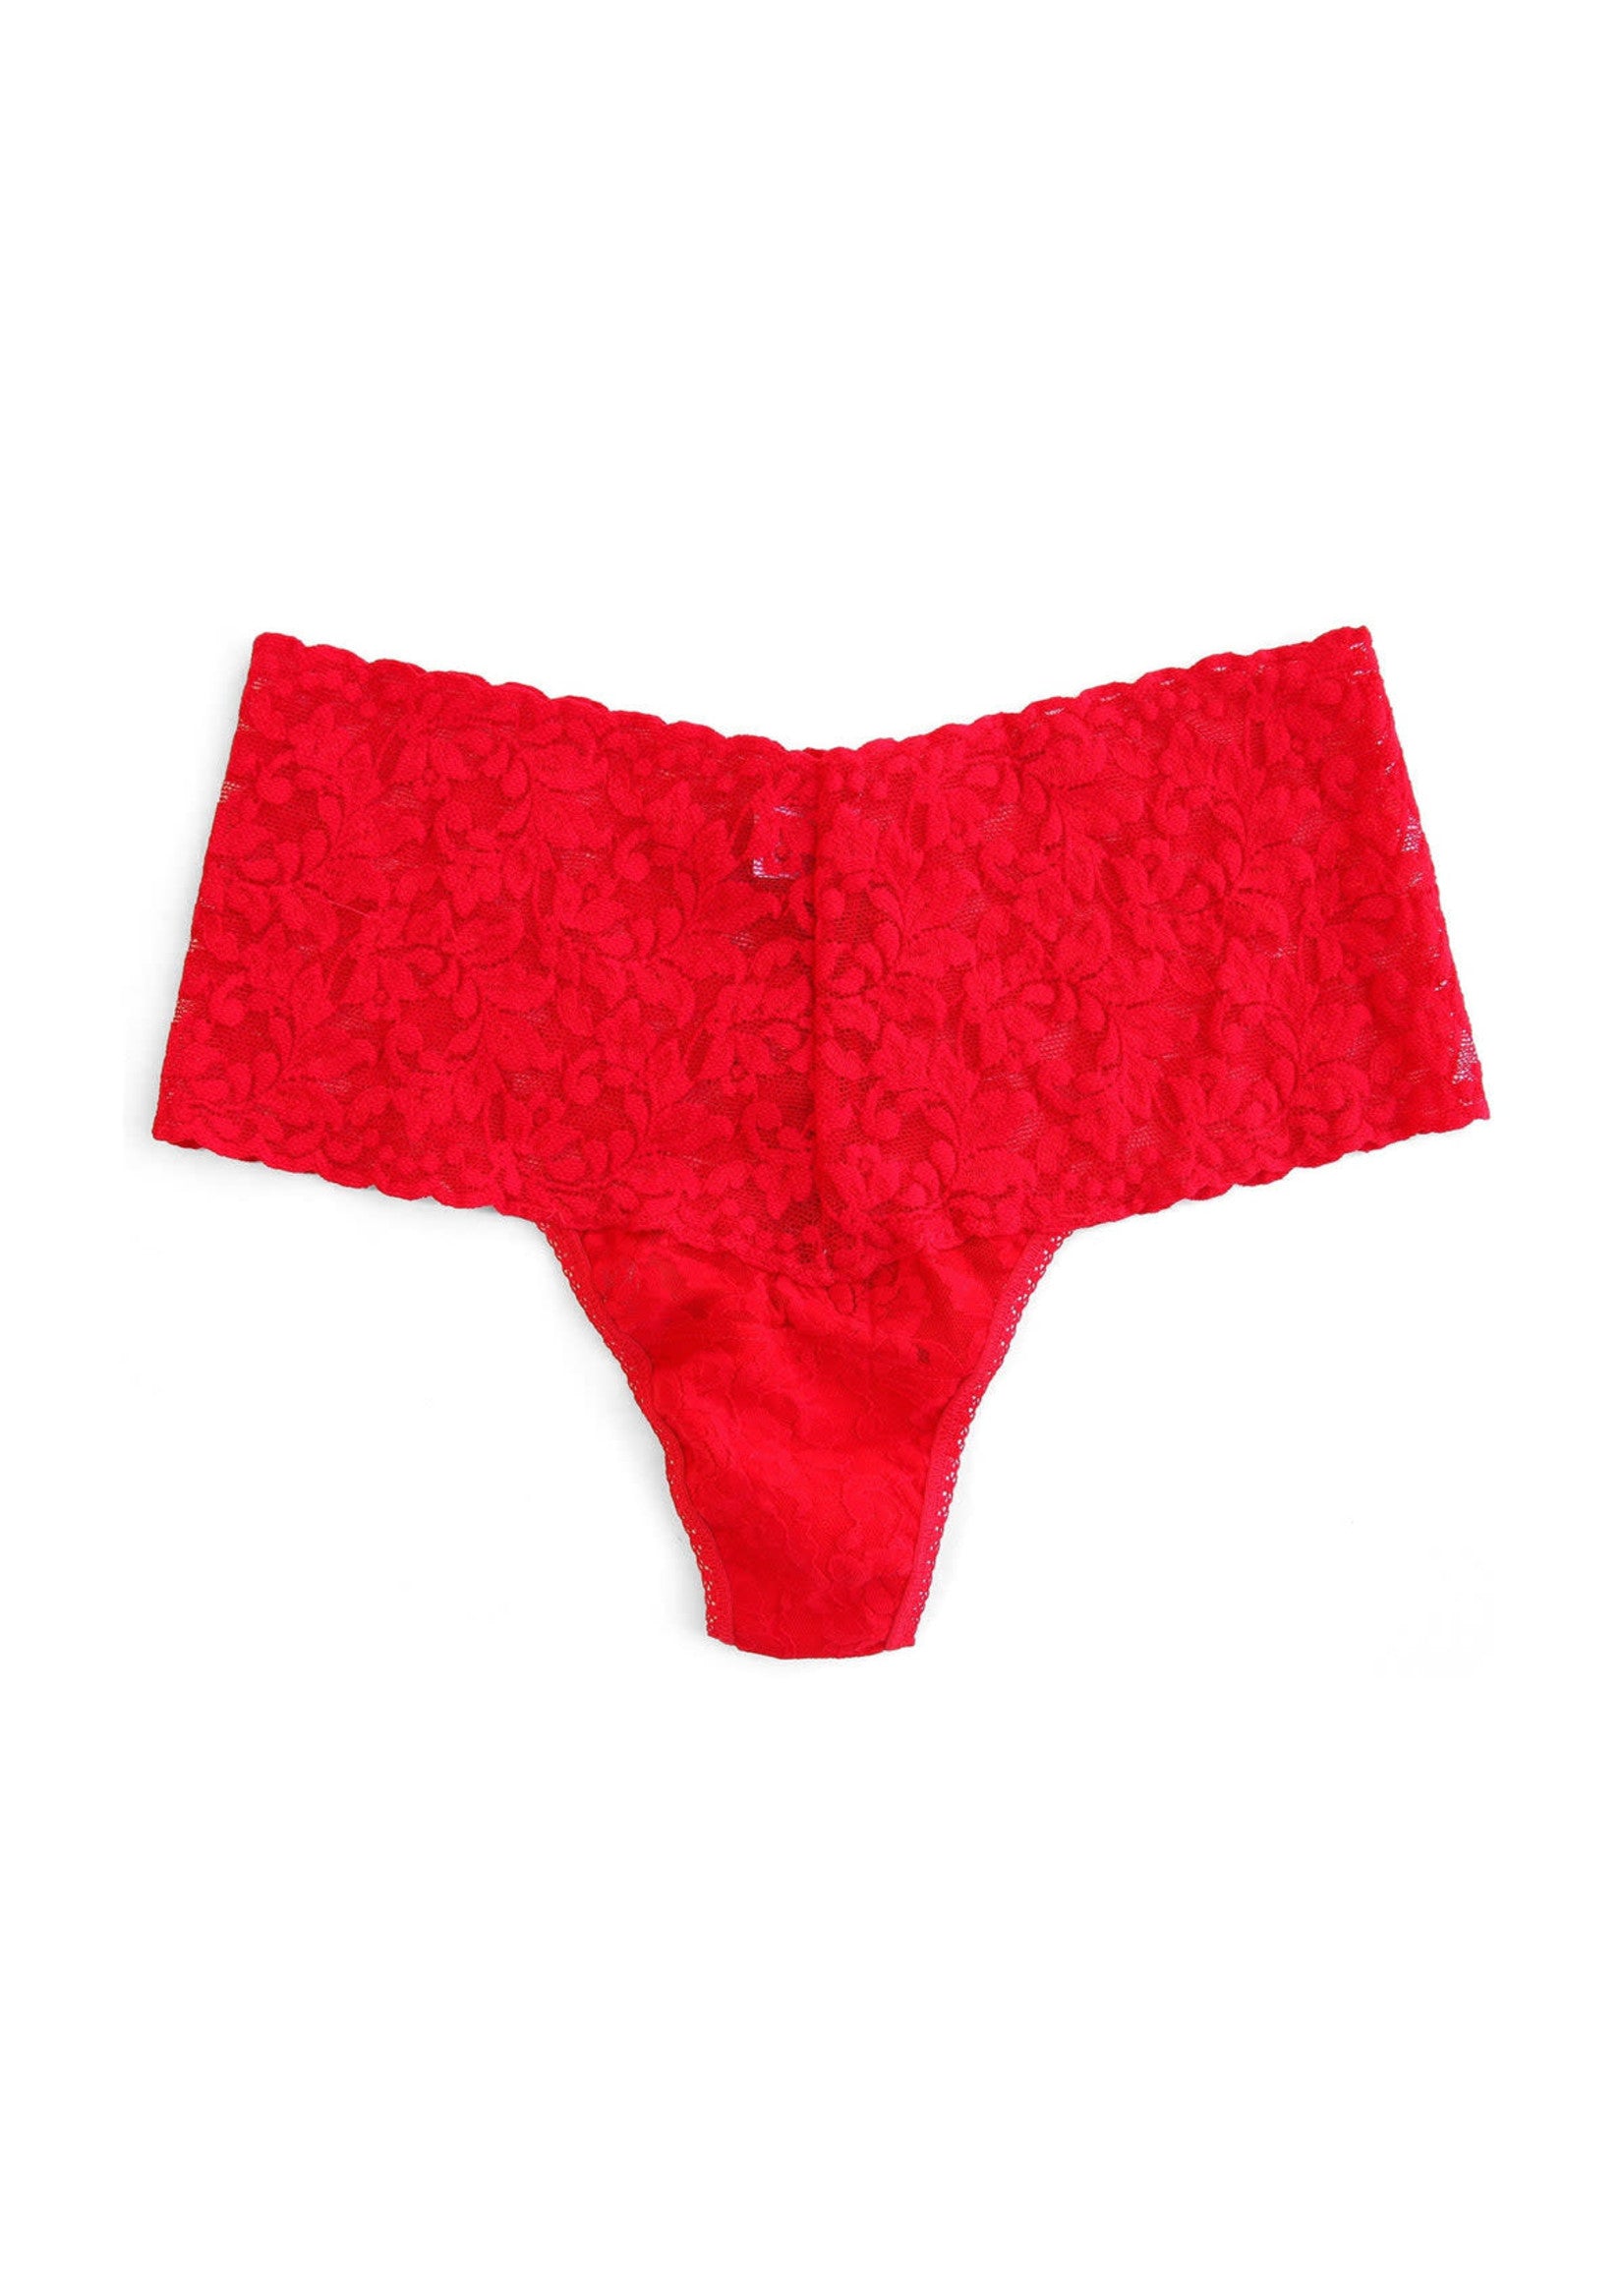 Hanky Panky Retro Thong in Red in front view product image